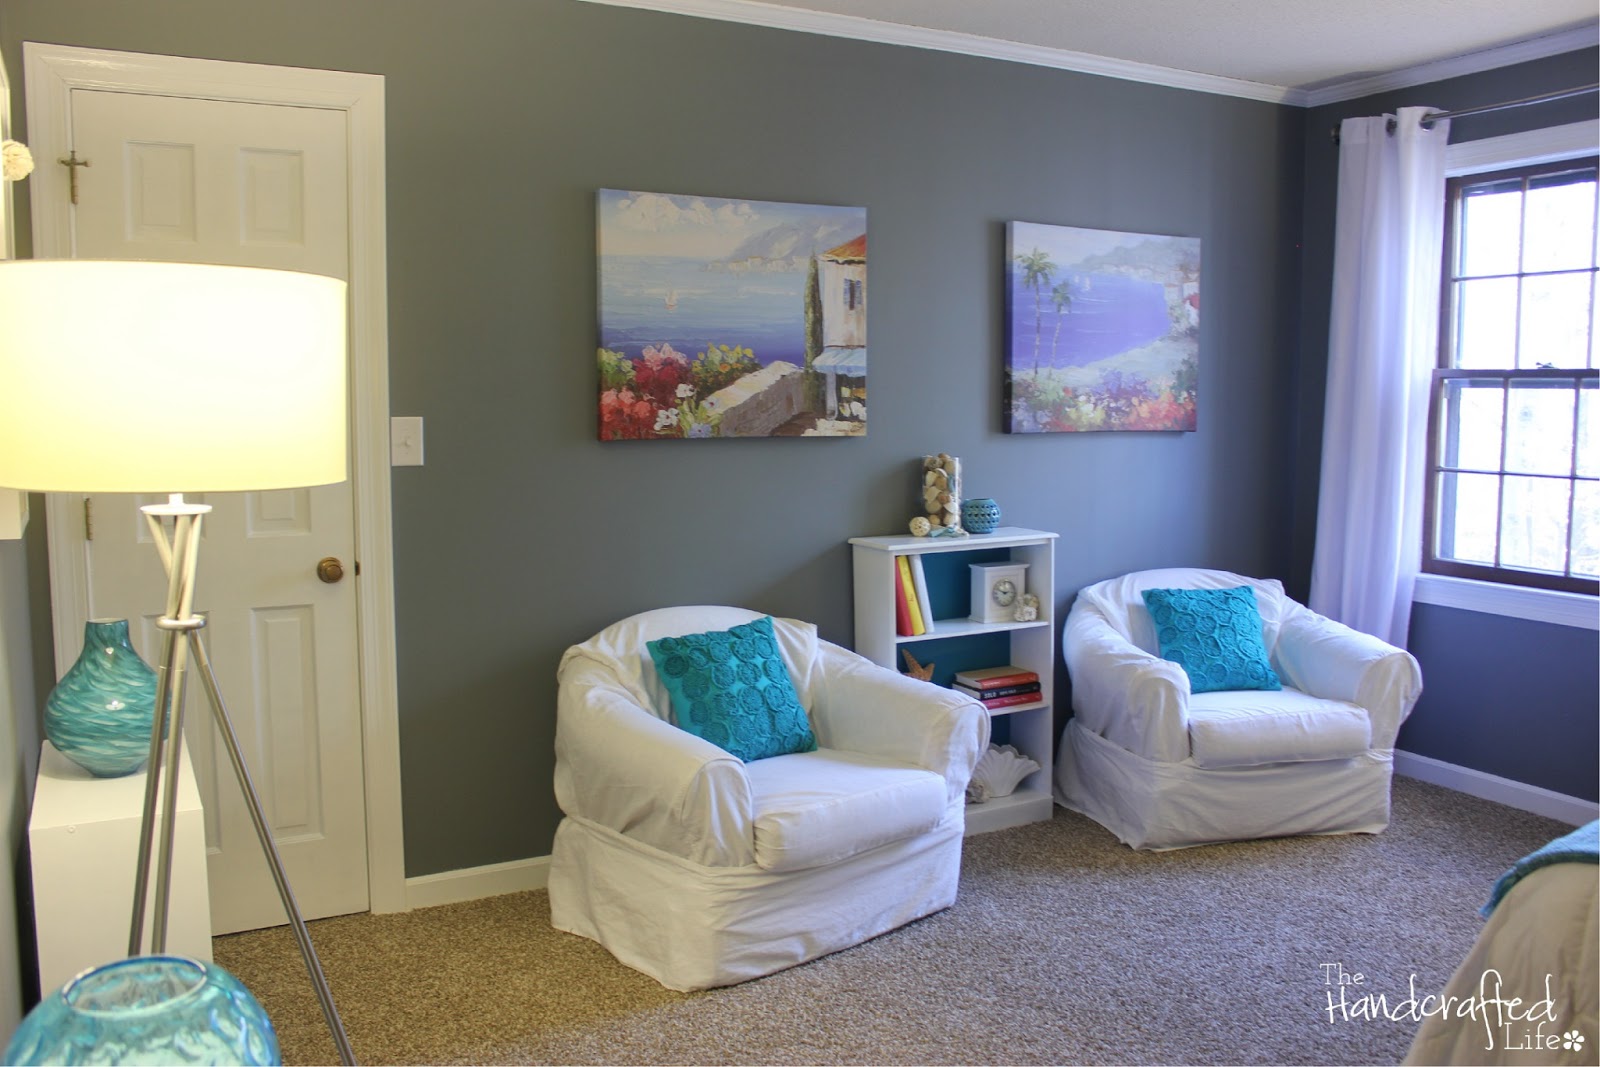 *The Handcrafted Life*: Teal, White and Grey Guest Bedroom Reveal